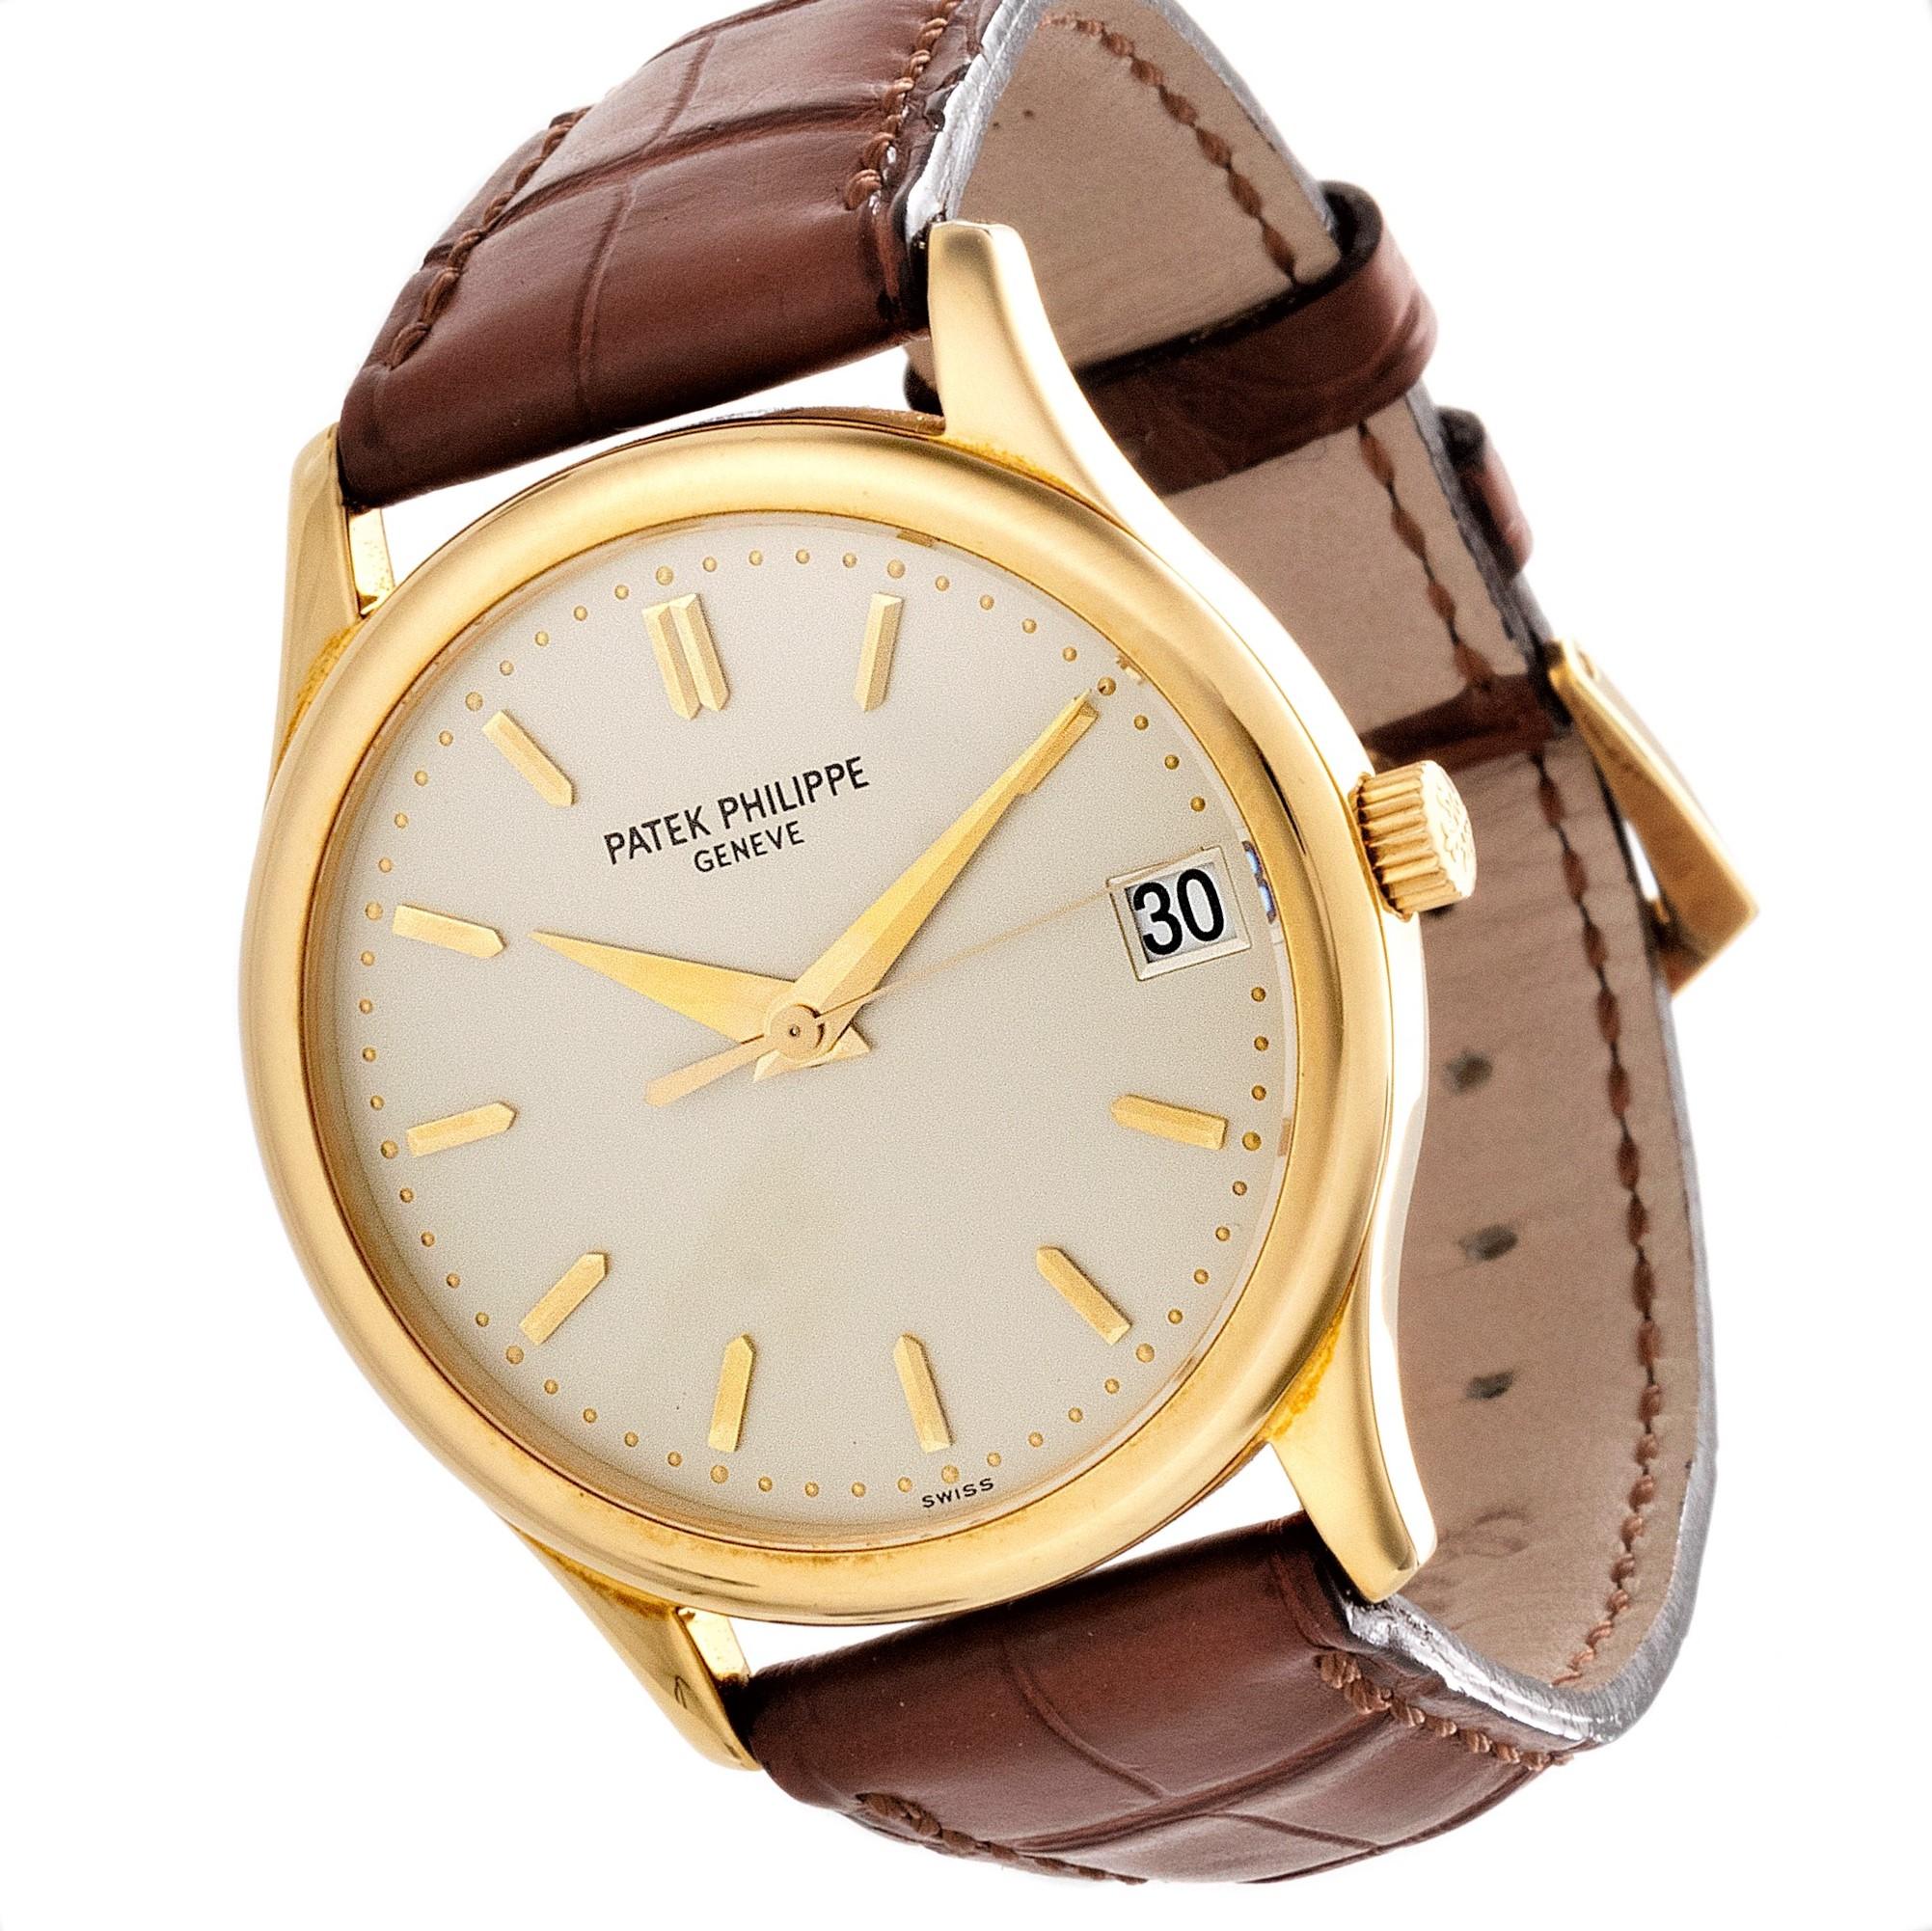 This 3998J Calatrava Patek Philippe watch features a 315 SC Automatic winding movement with date and new Patek alligator strap with original 18K yellow gold Patek buckle.  The watch is further accompanied with its original certificate of